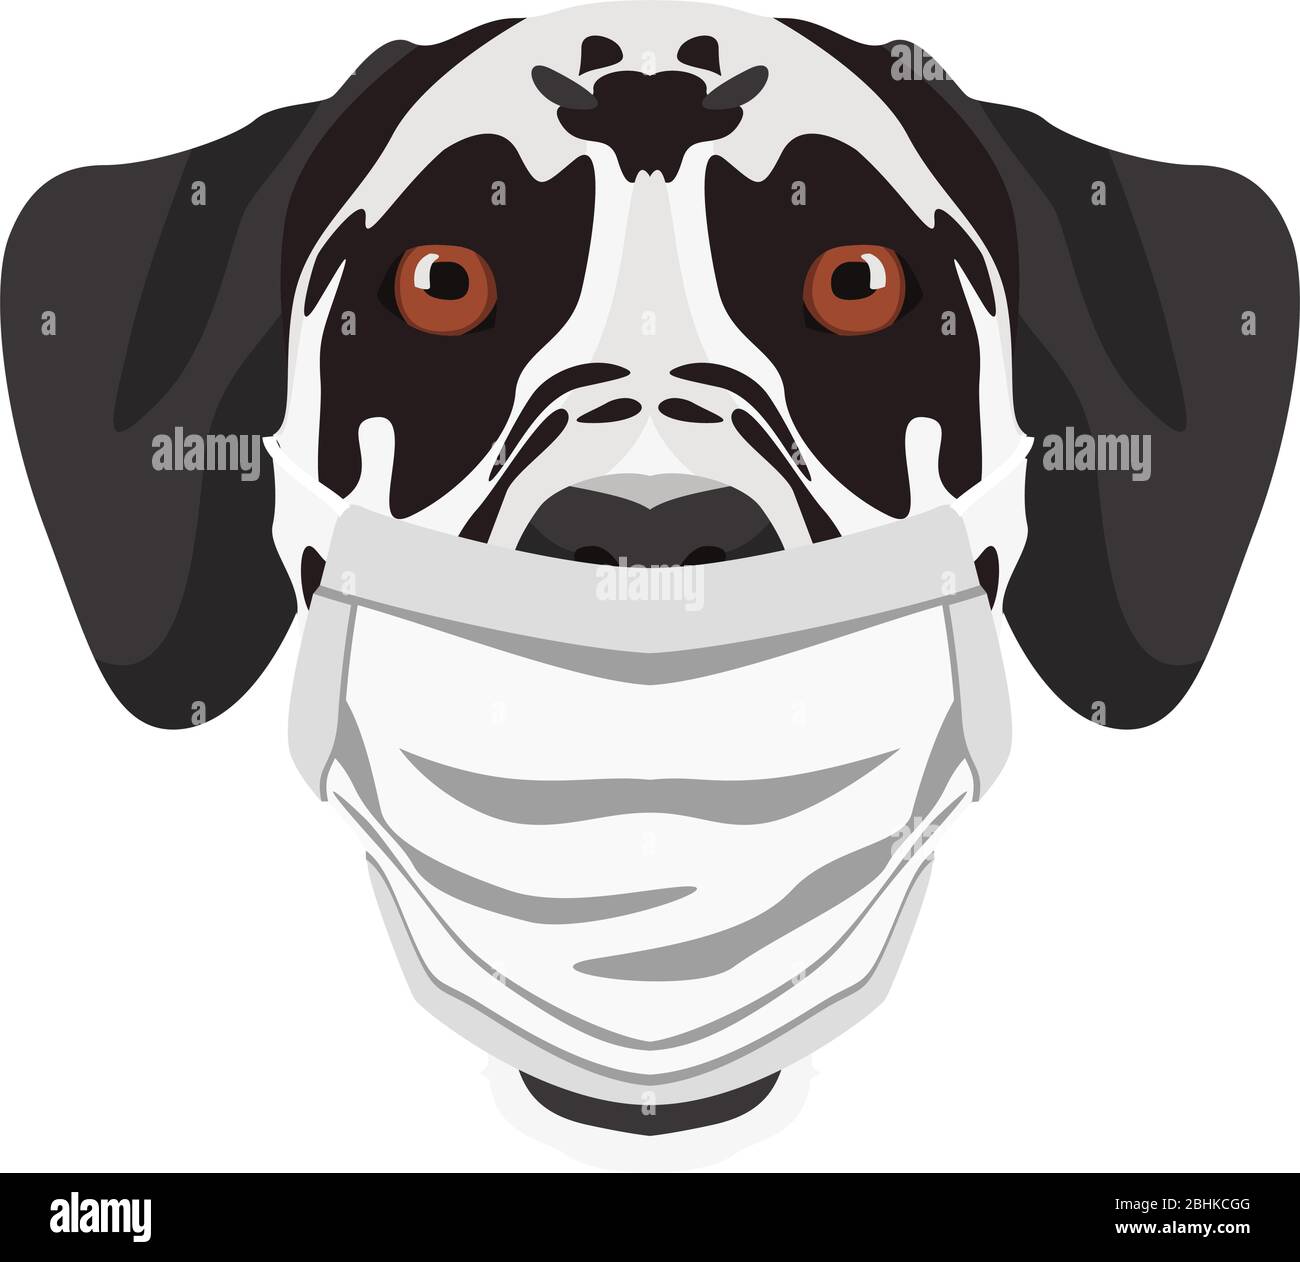 Illustration of a Dalmatian with a respirator. At this time of the pandemic, the design is a nice graphic for fans of dogs. Stock Vector